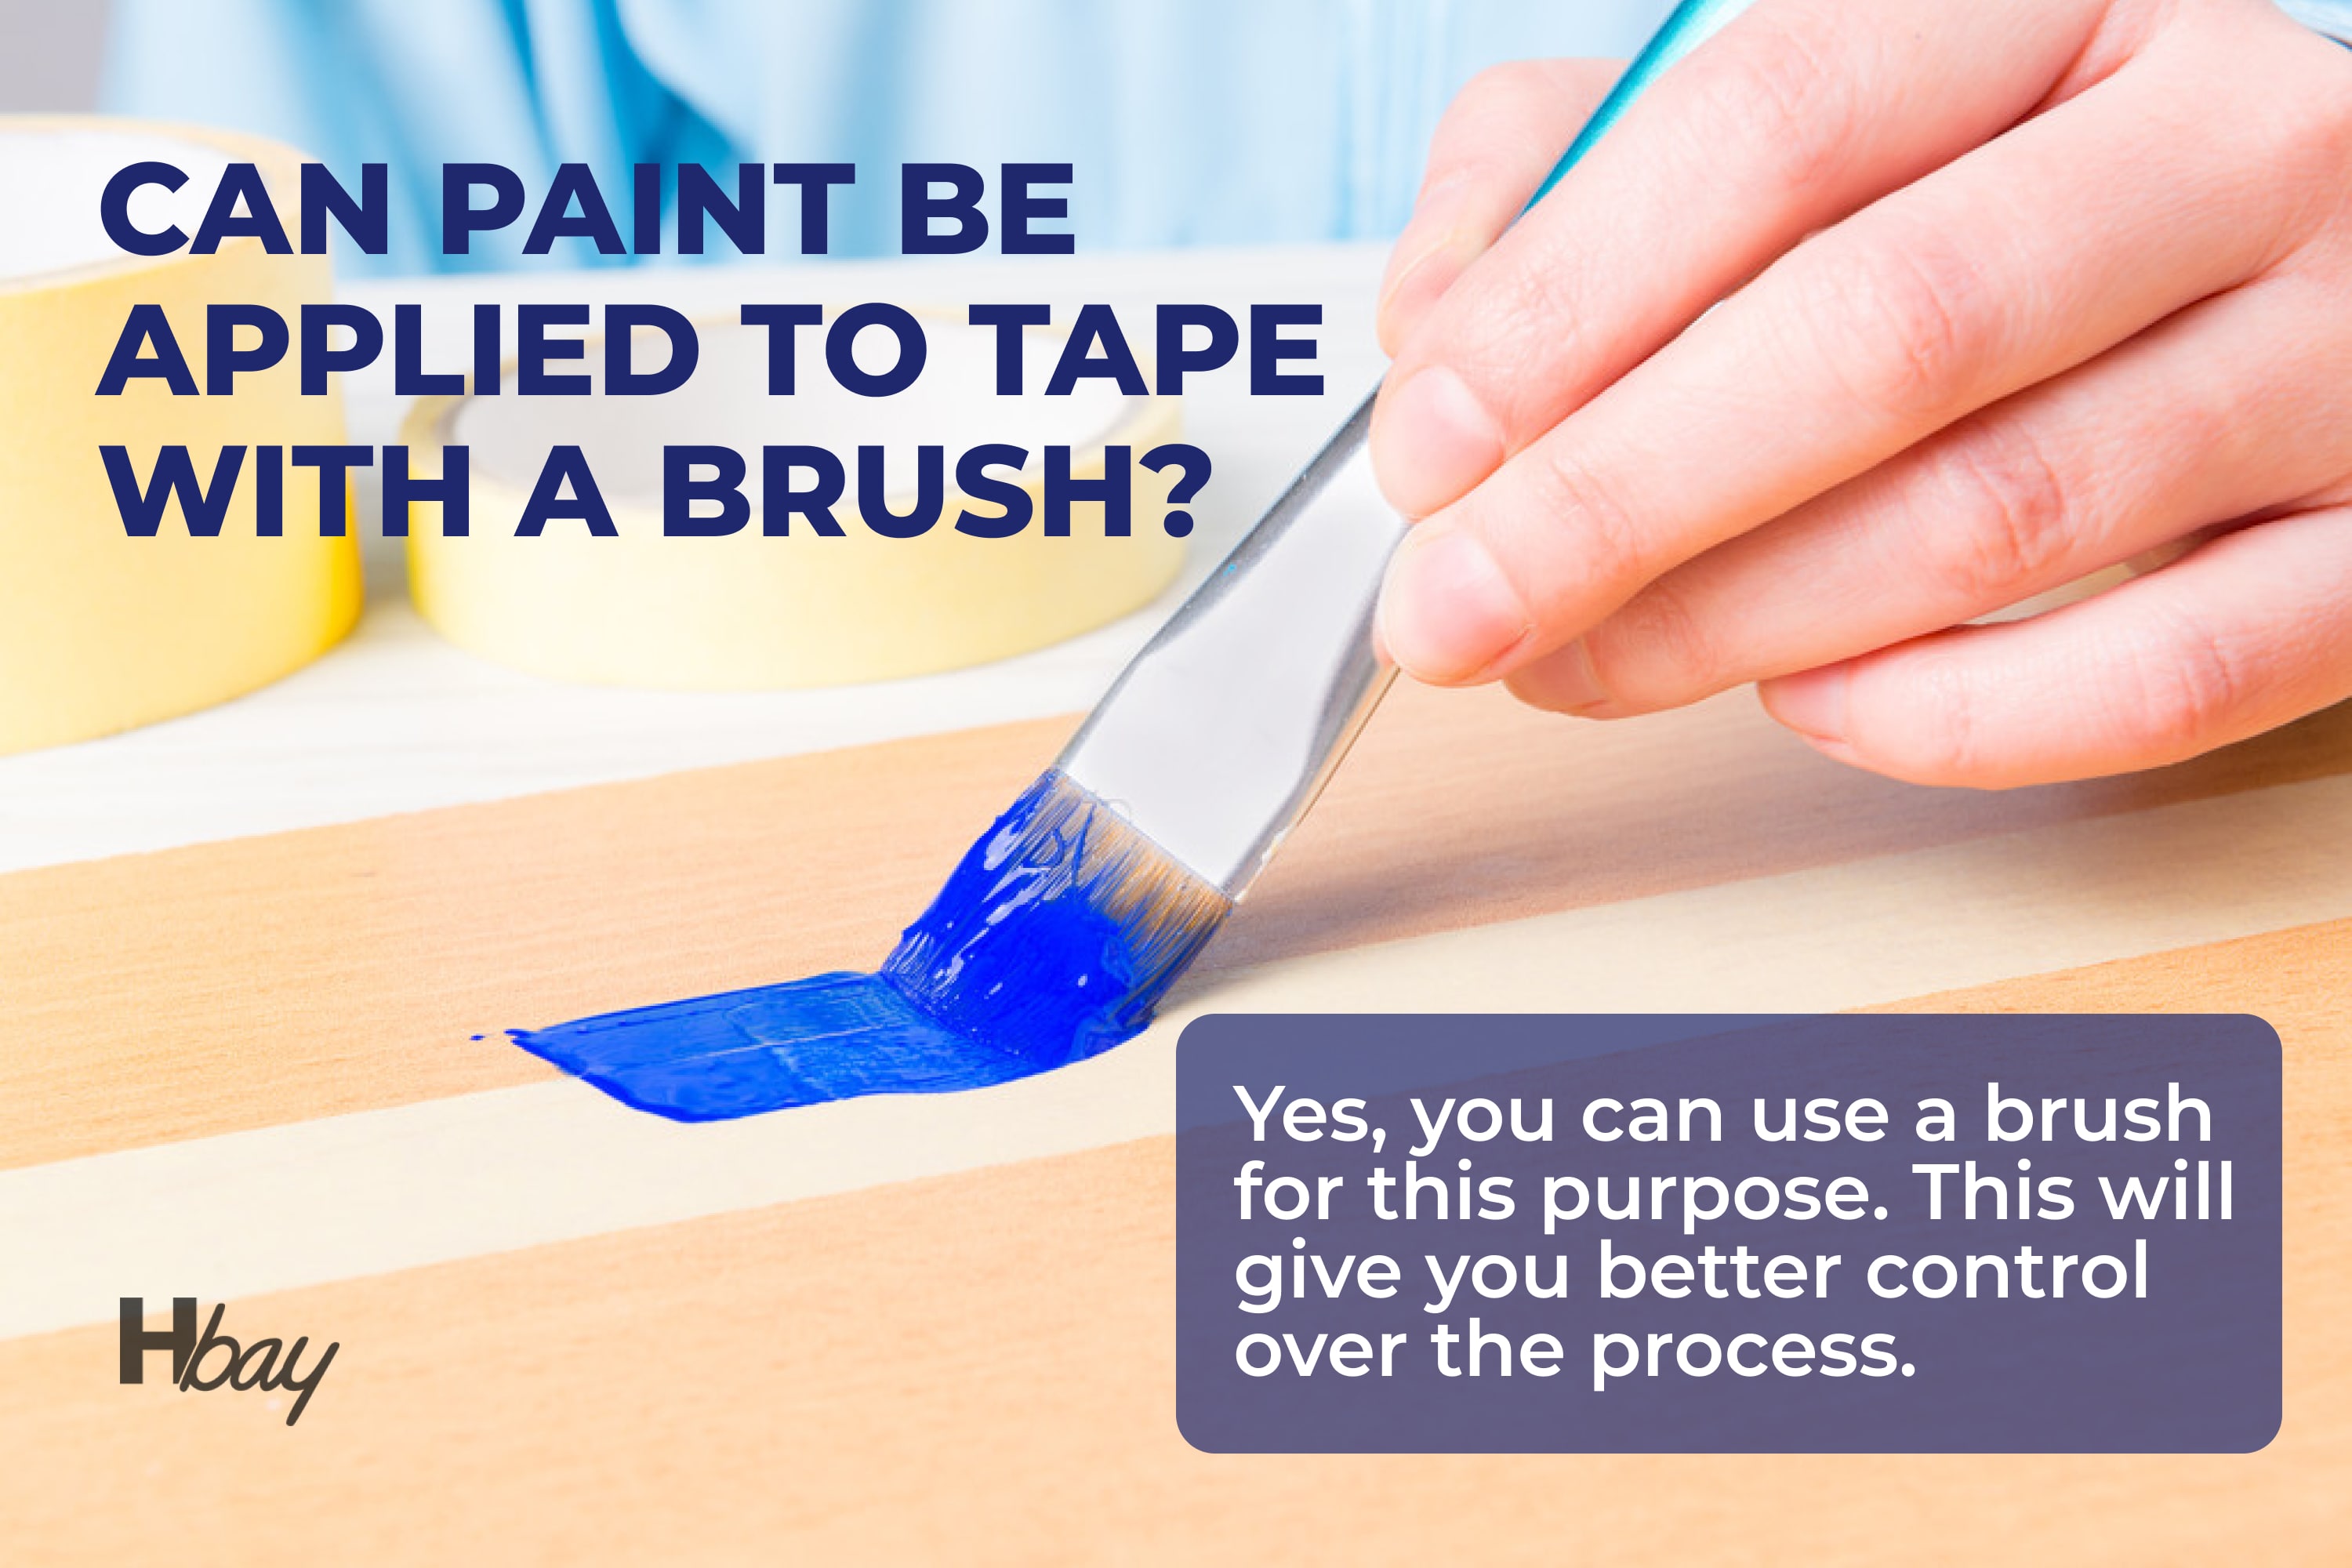 Can paint be applied to tape with a brush